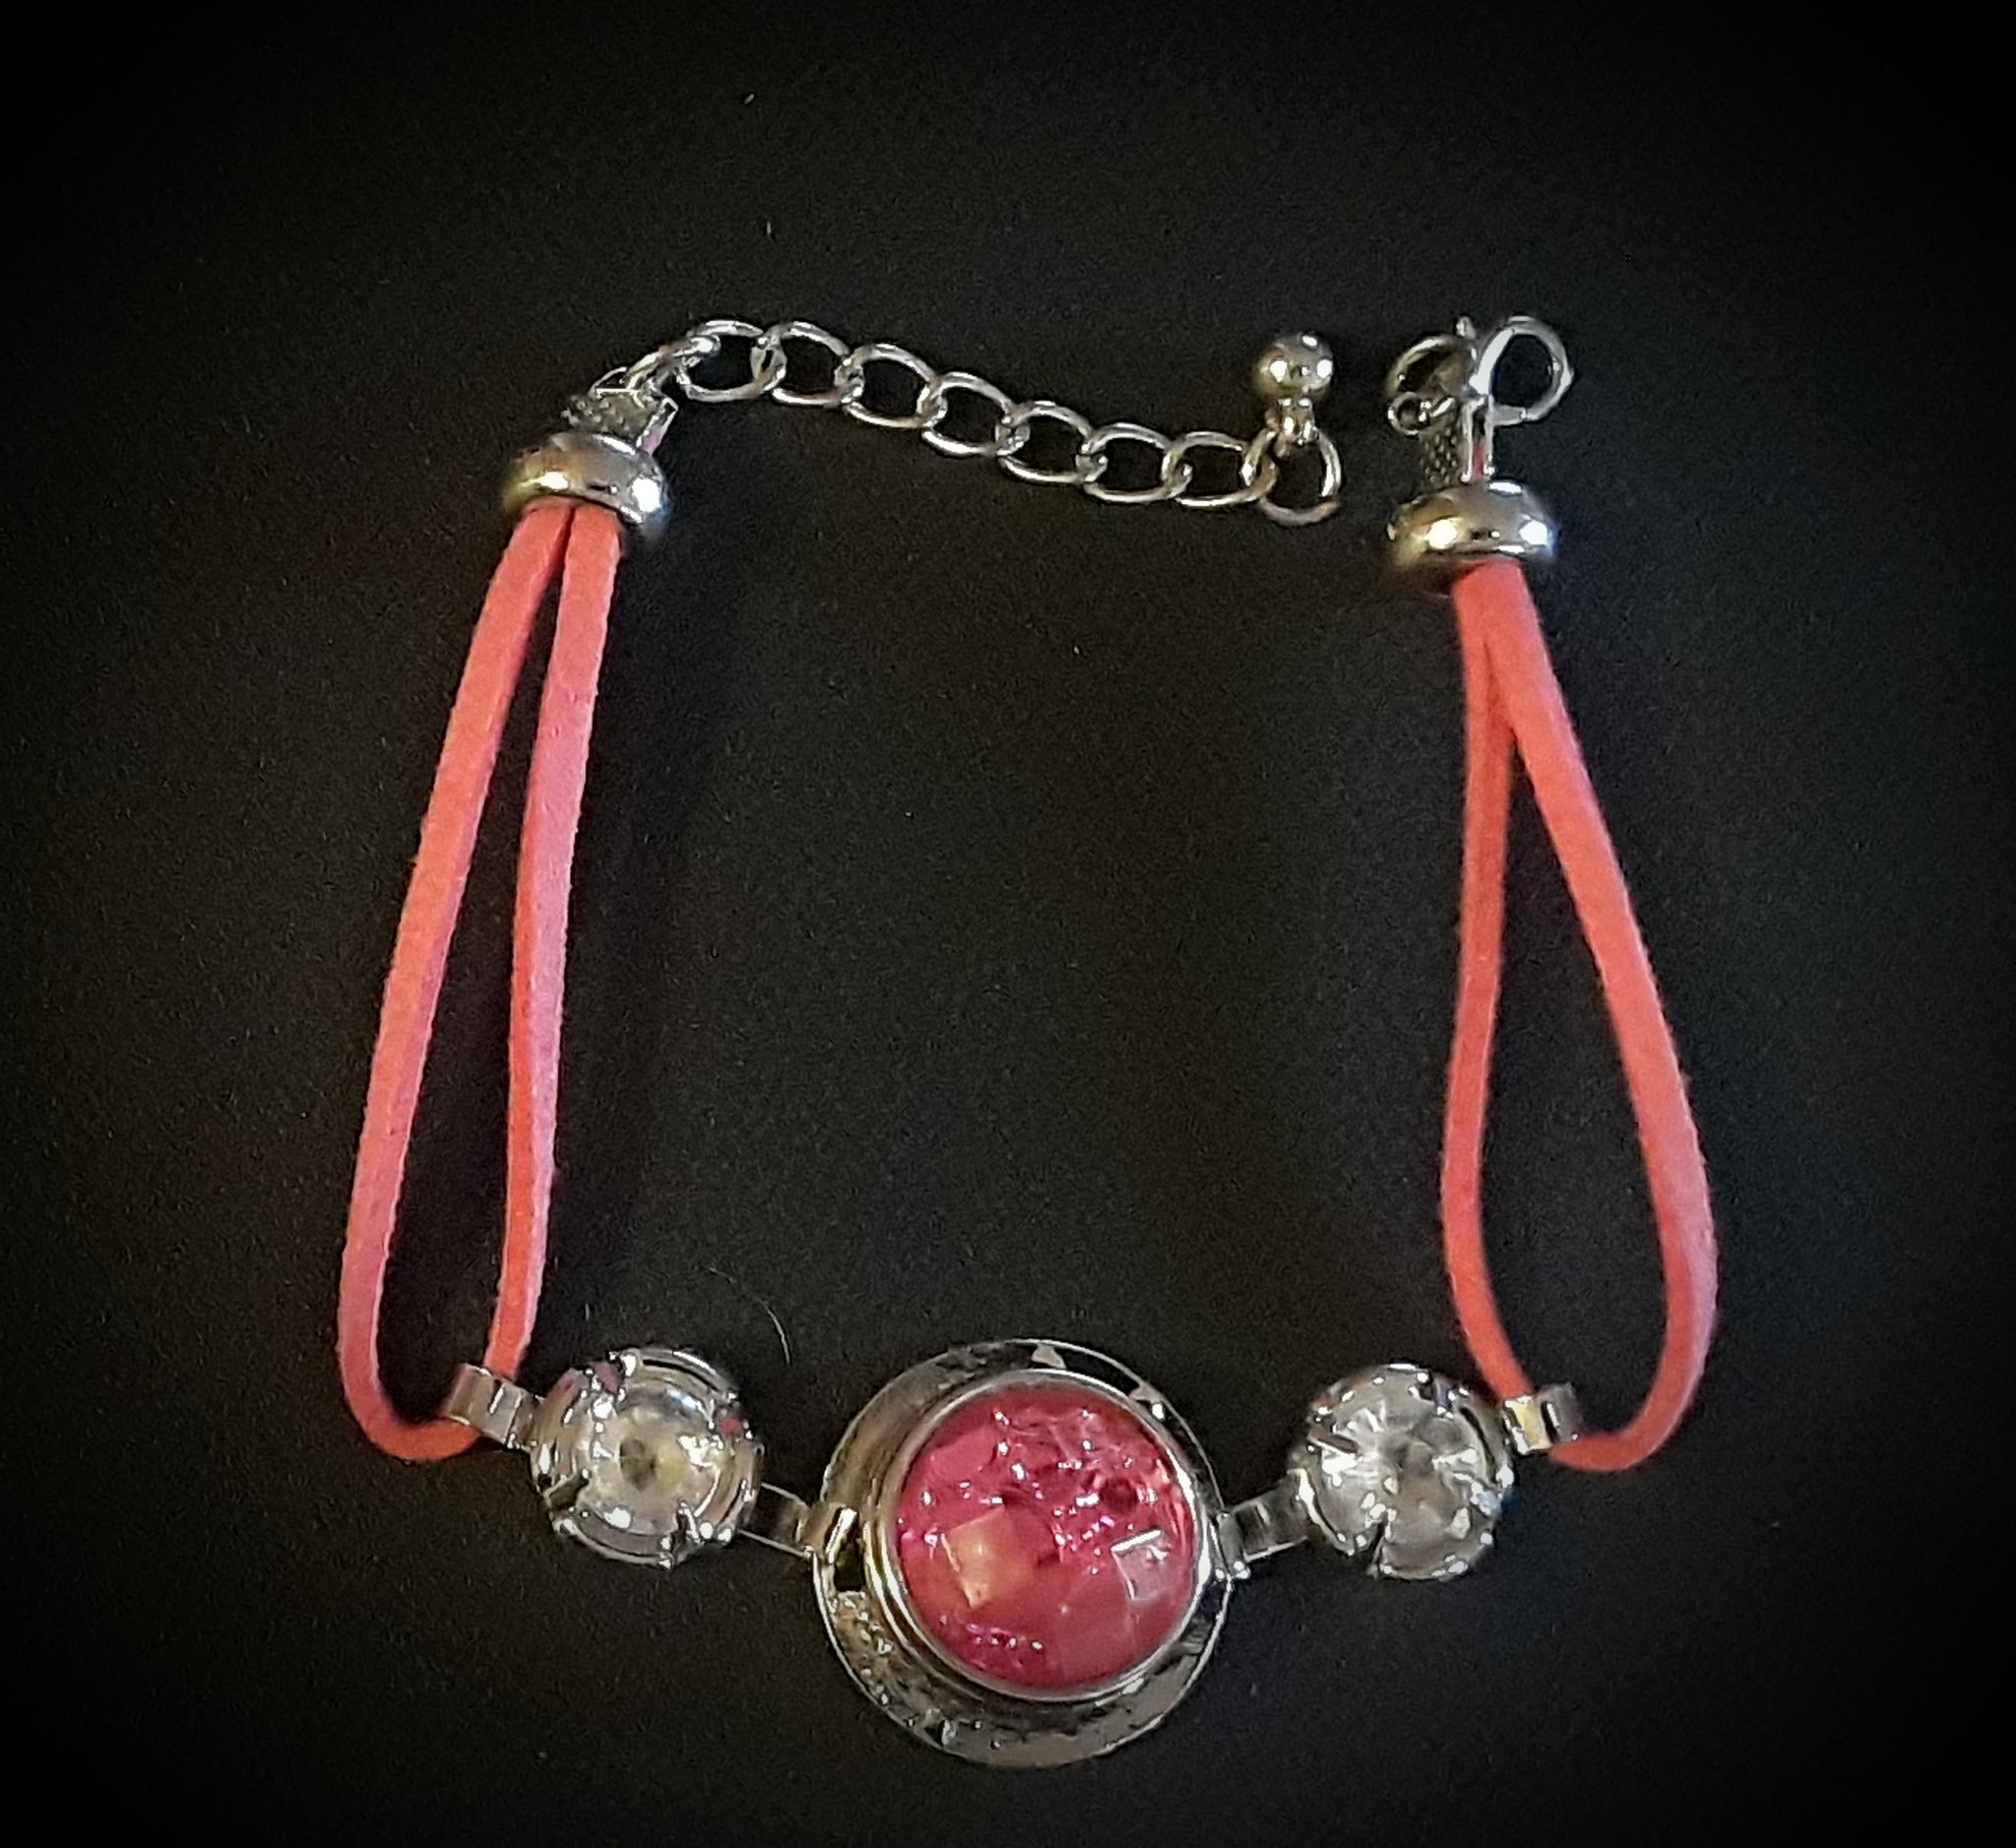 Pink 18mm noosa snap bracelet with 2 snaps